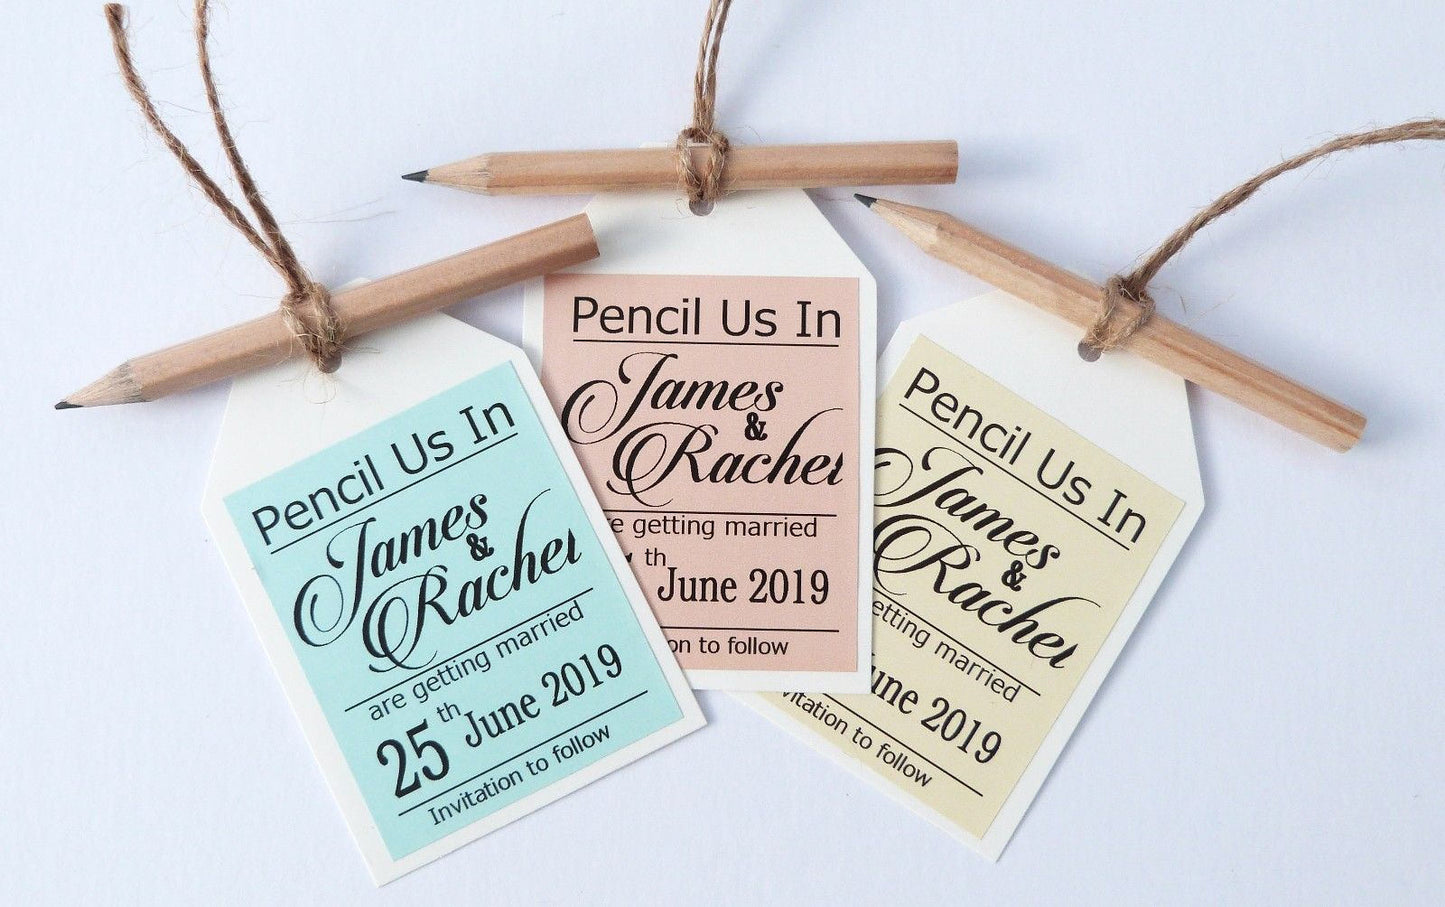 10 x Personalised pencil us in save the date tags and envelopes wedding invitation pink blue cream kraft white